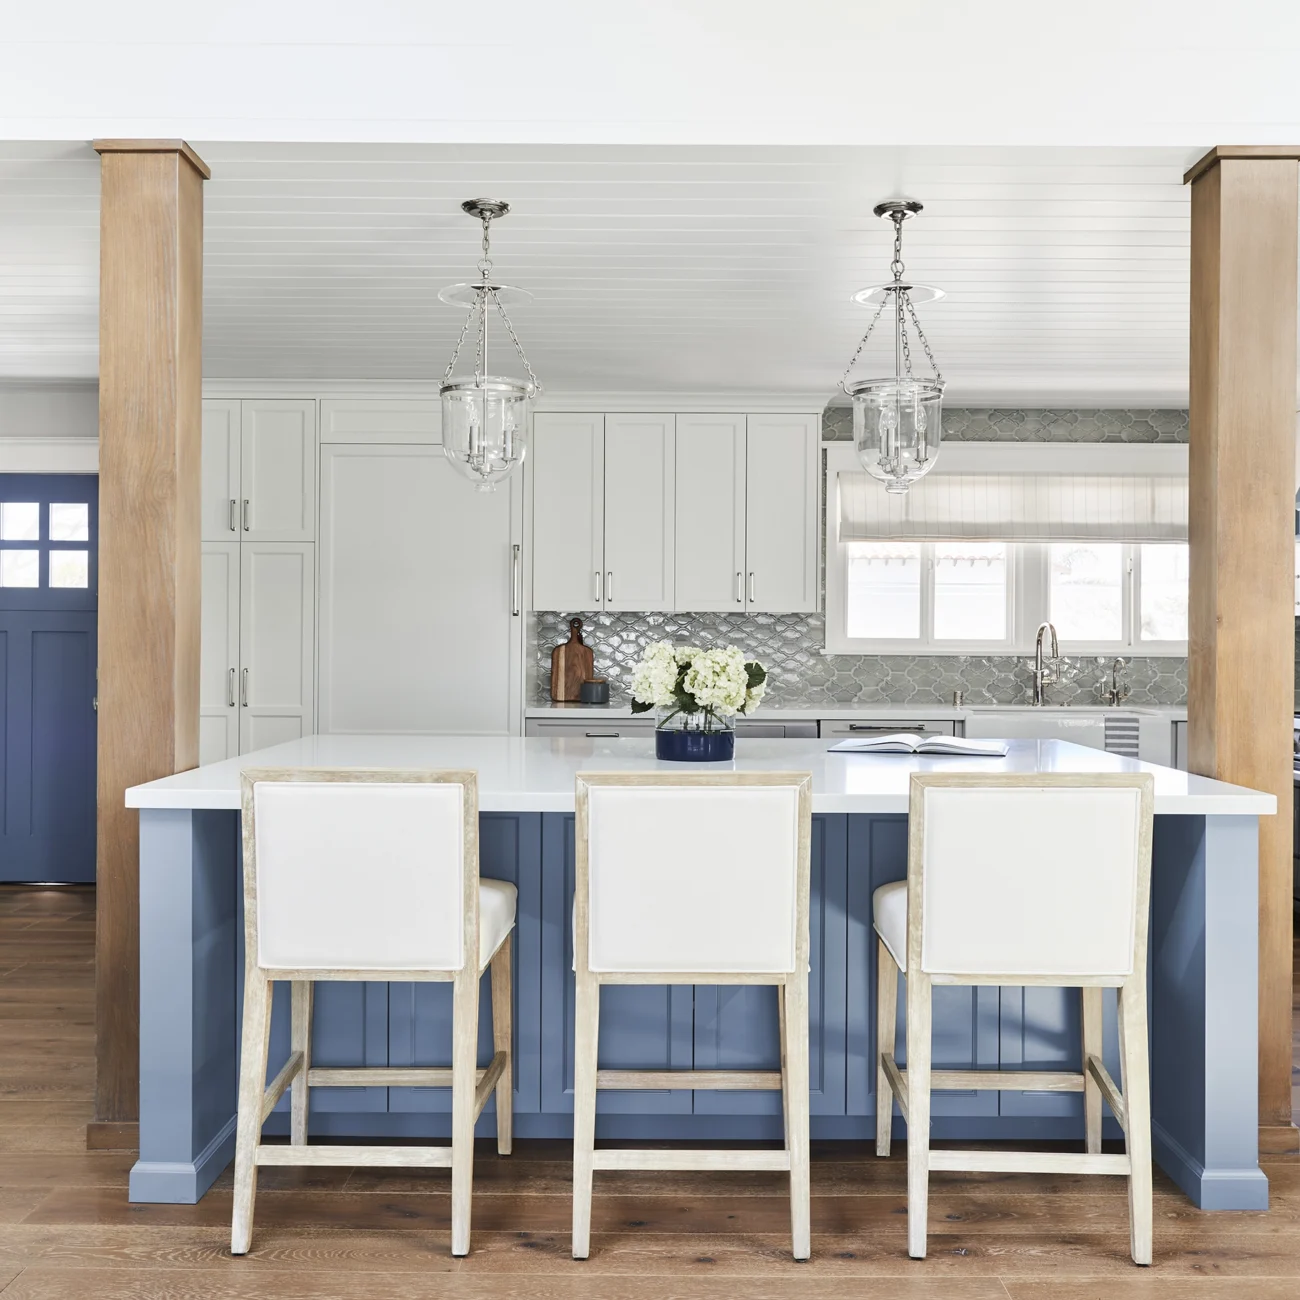 Christine Vroom Interiors | Flournoy | Costal White Kitchen with Blue cabinetry